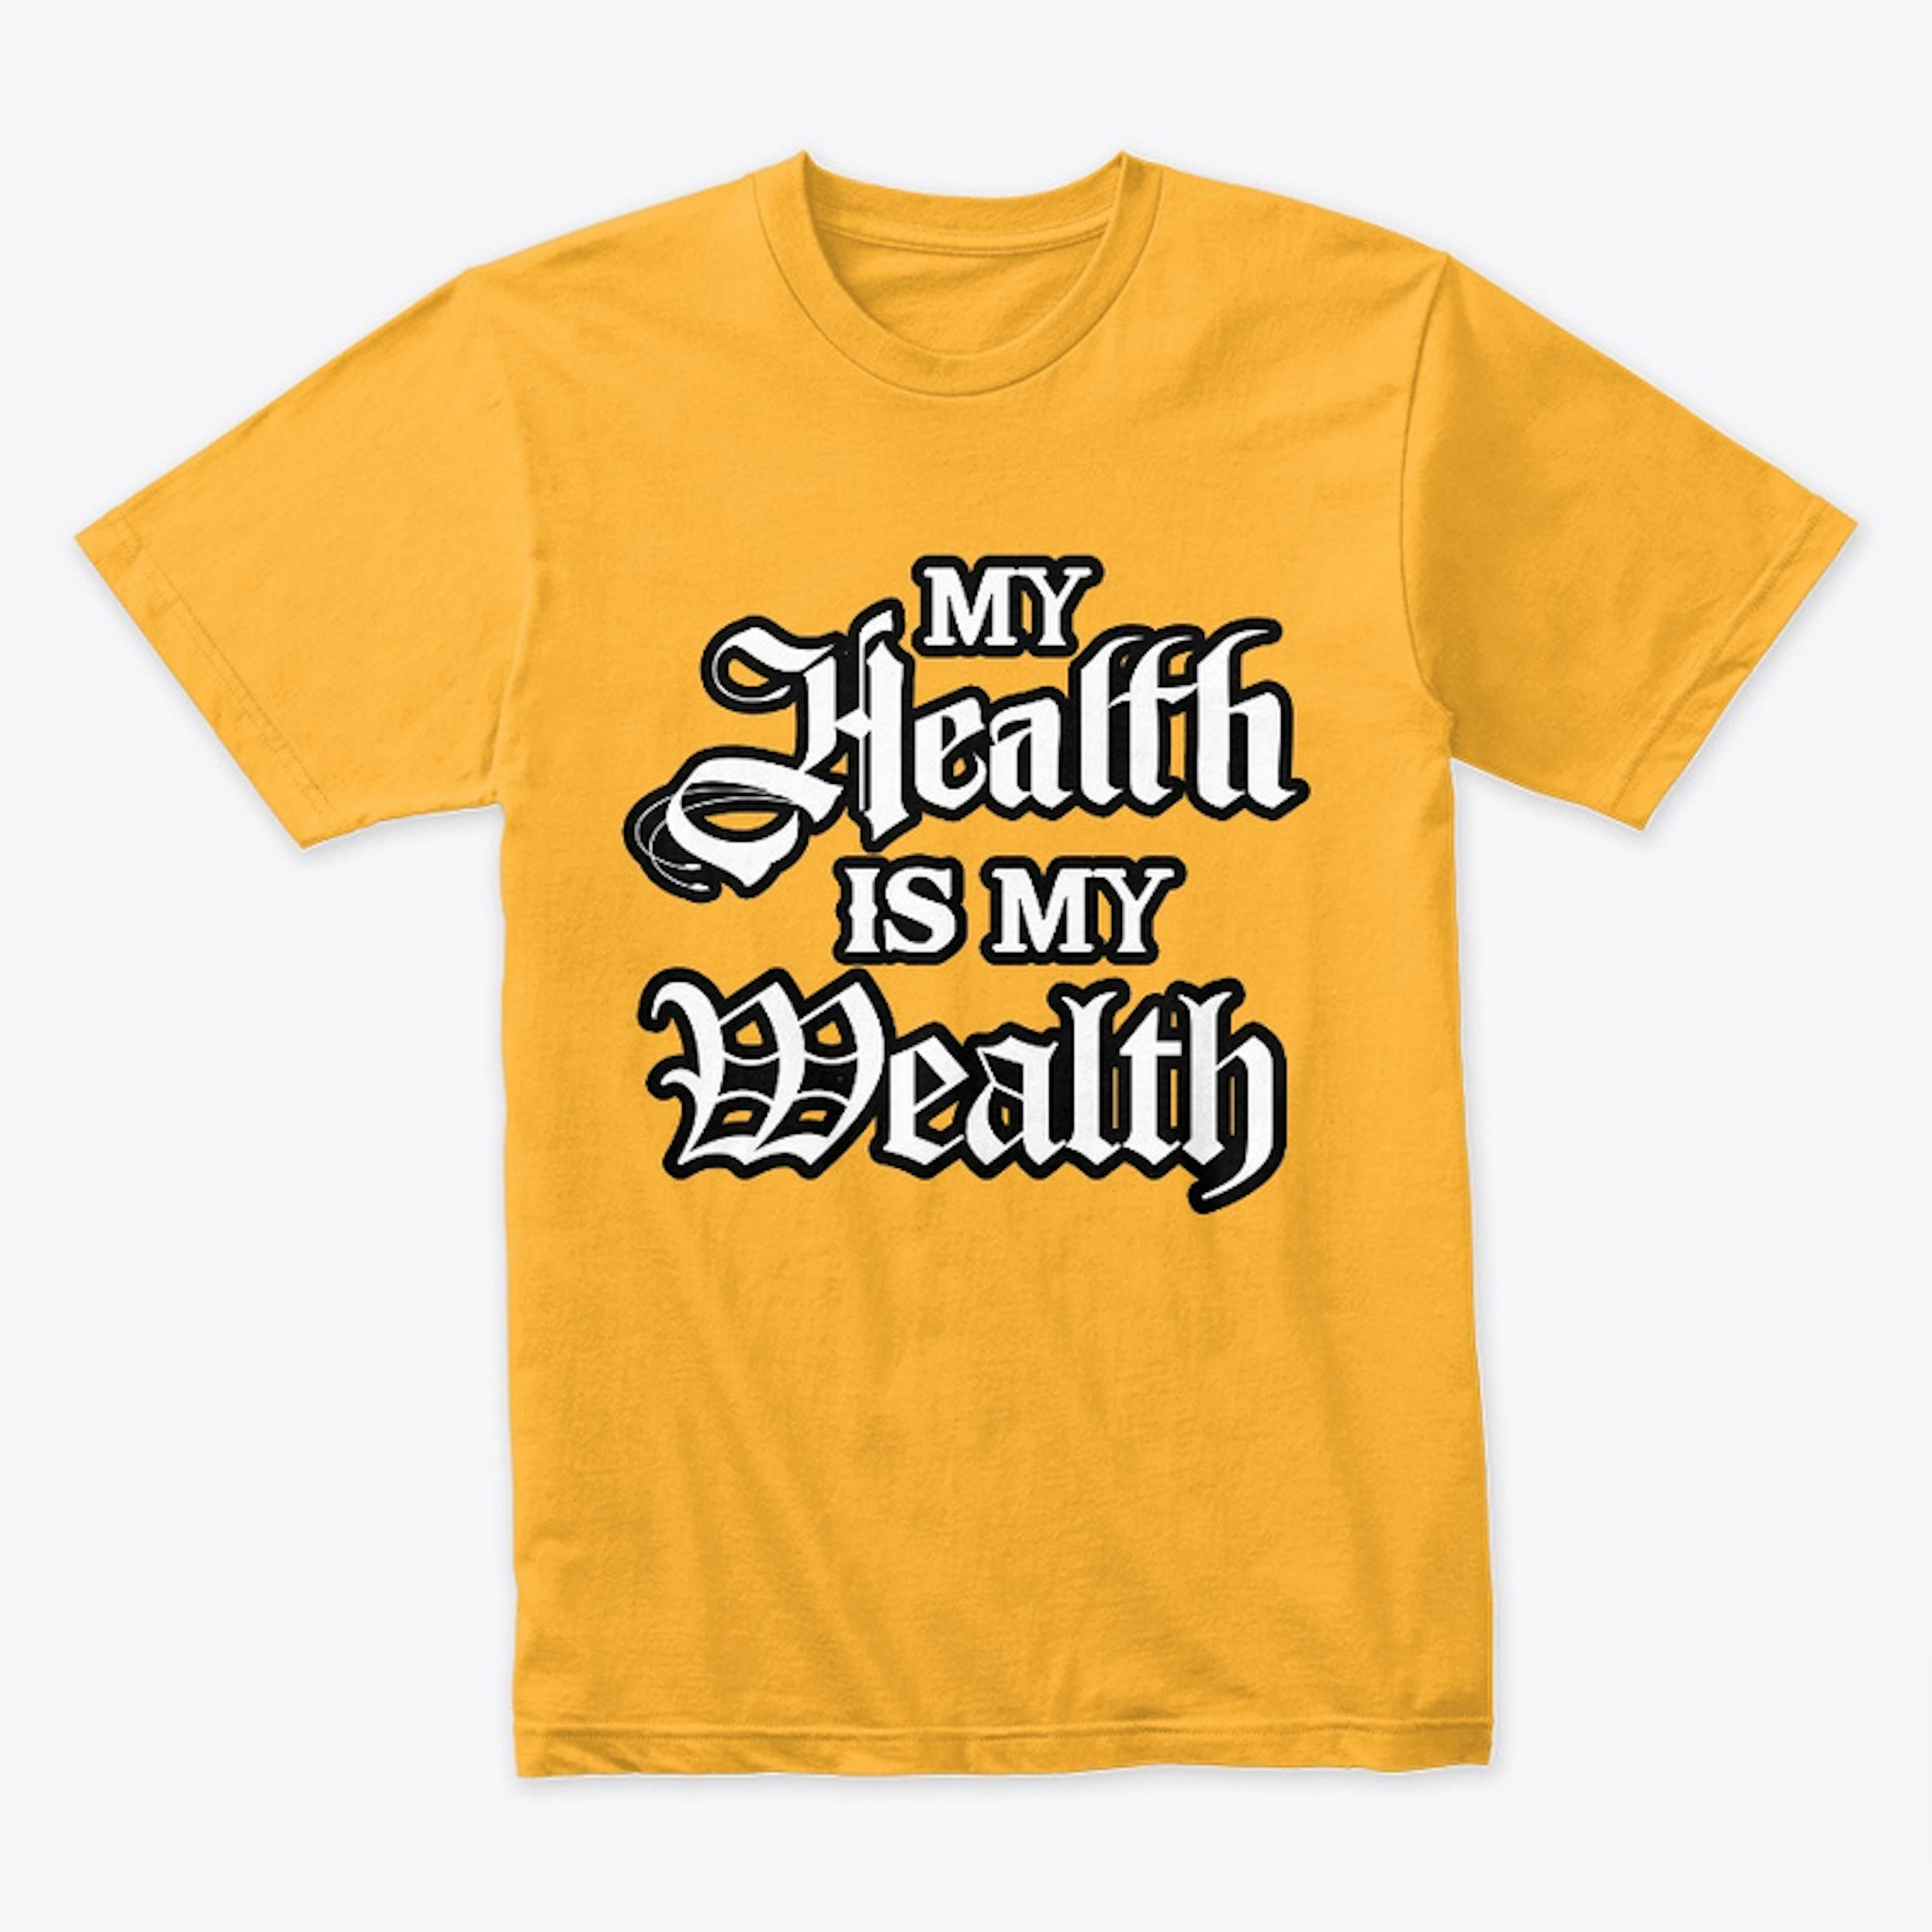 My Health is my Wealth 